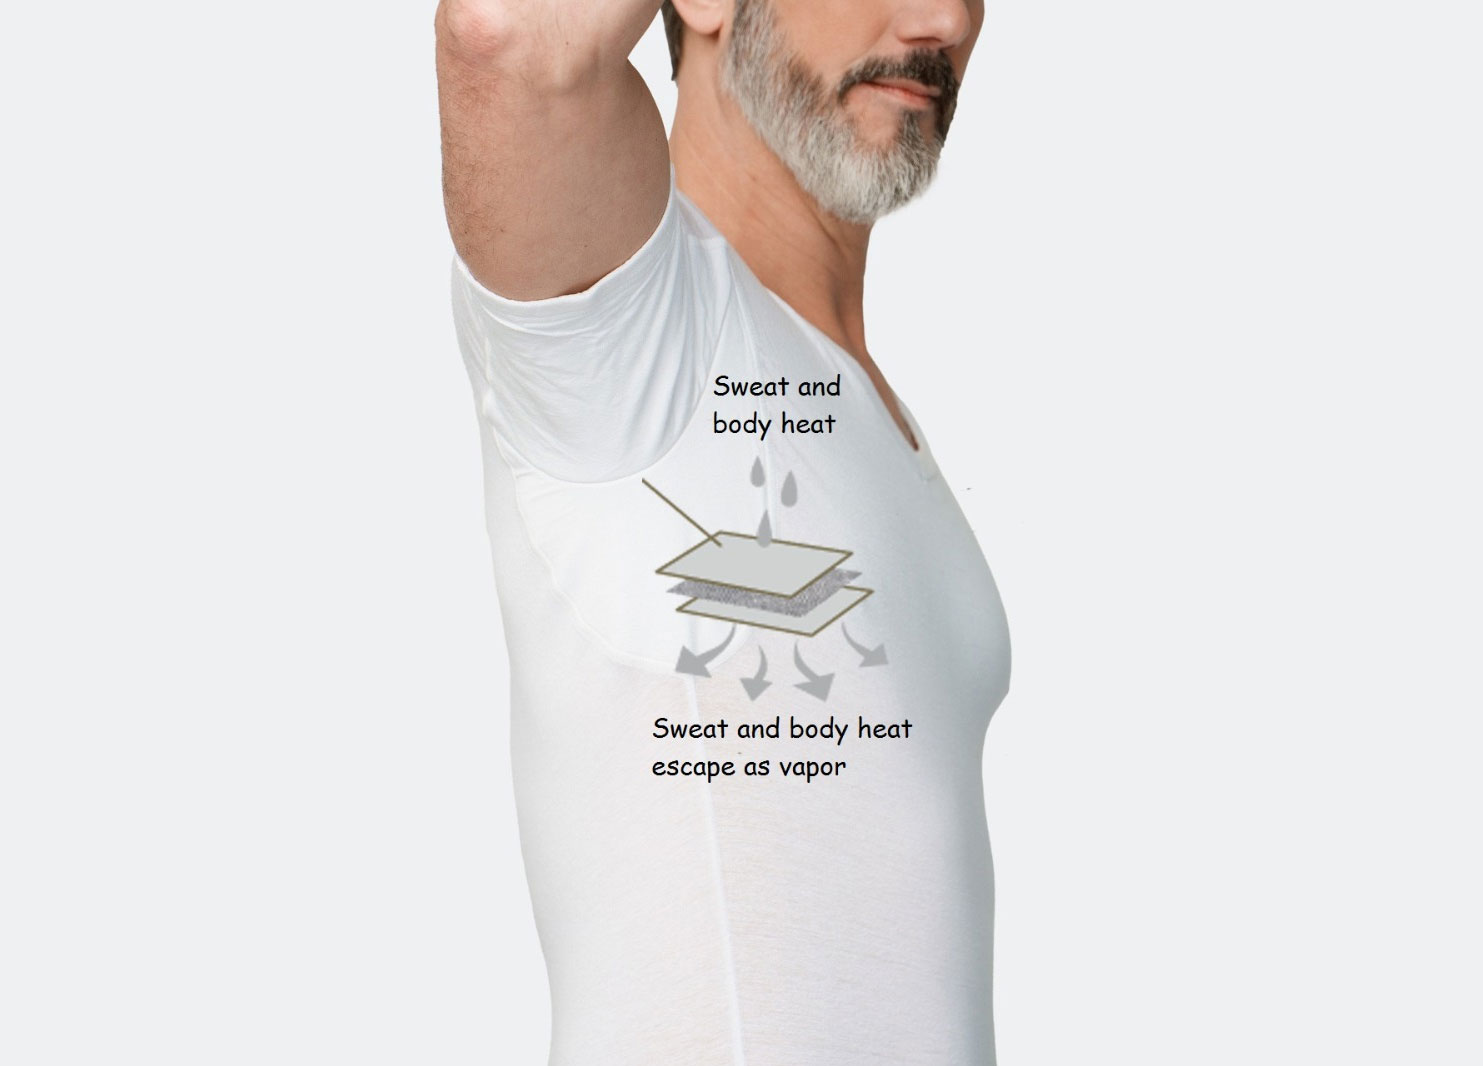 Sweat-proof undershirt - for your security and comfort